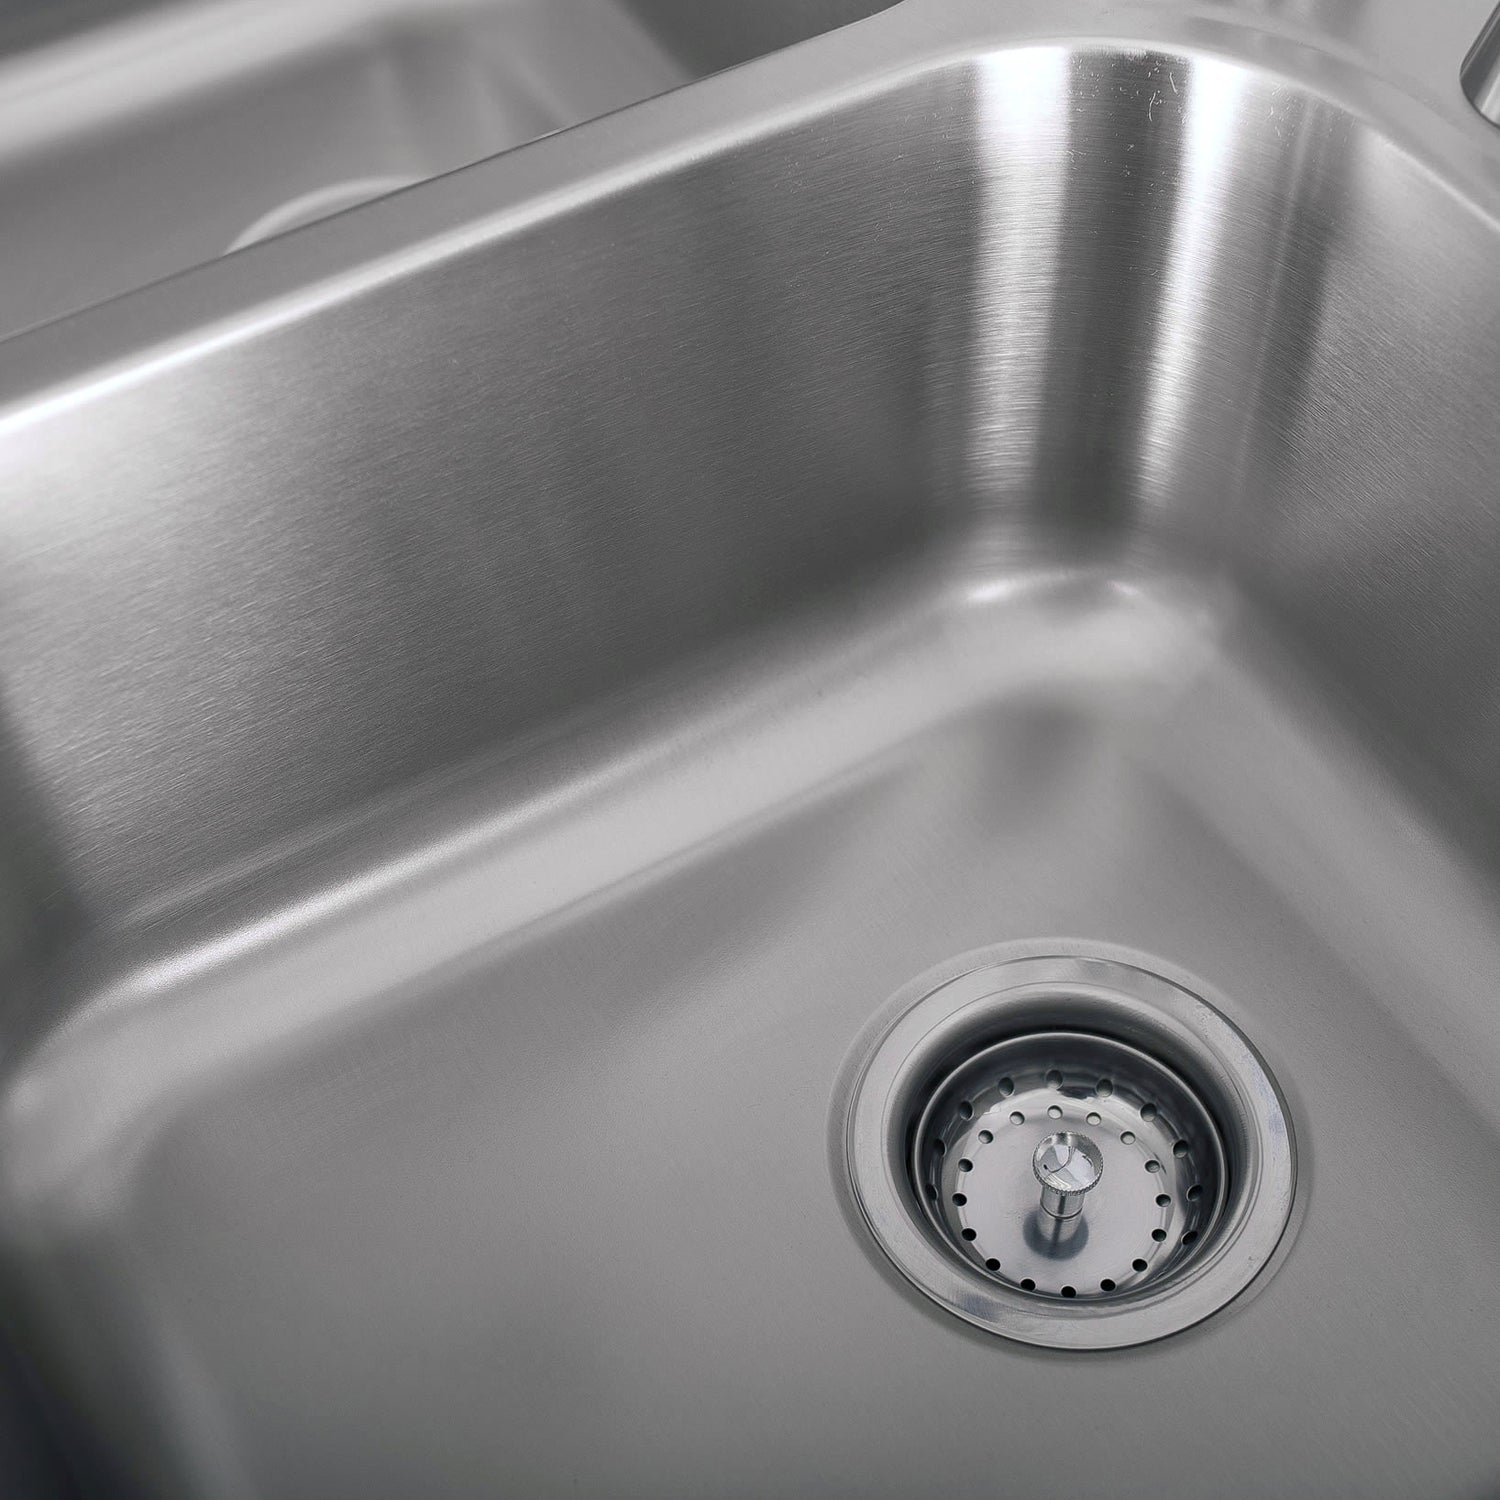 DAX 50/50 Double Bowl Top Mount Kitchen Sink, 20 Gauge Stainless Steel, Brushed Finish , 33 x 22 x 9 Inches (DAX-OM-3322)